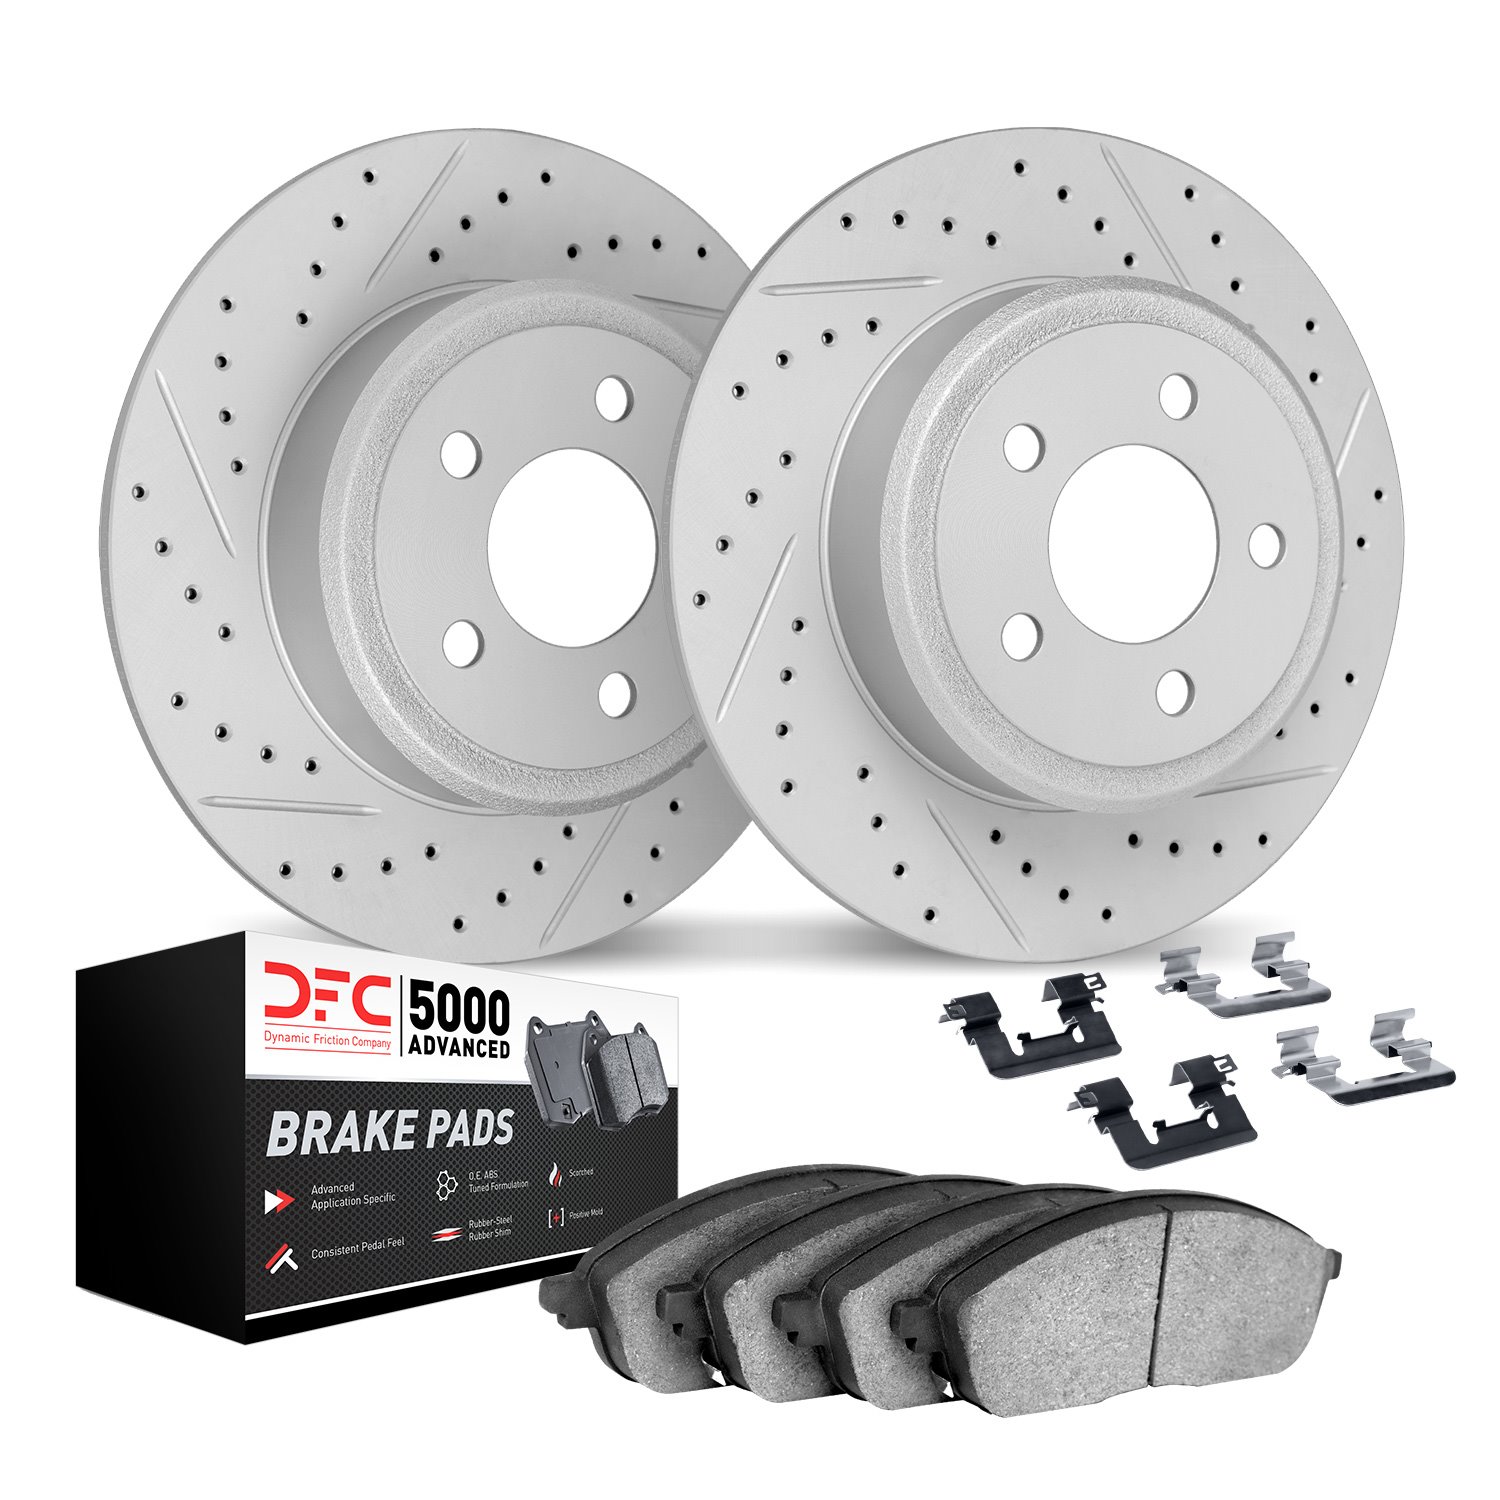 2512-63044 Geoperformance Drilled/Slotted Rotors w/5000 Advanced Brake Pads Kit & Hardware, 2012-2018 Mercedes-Benz, Position: R